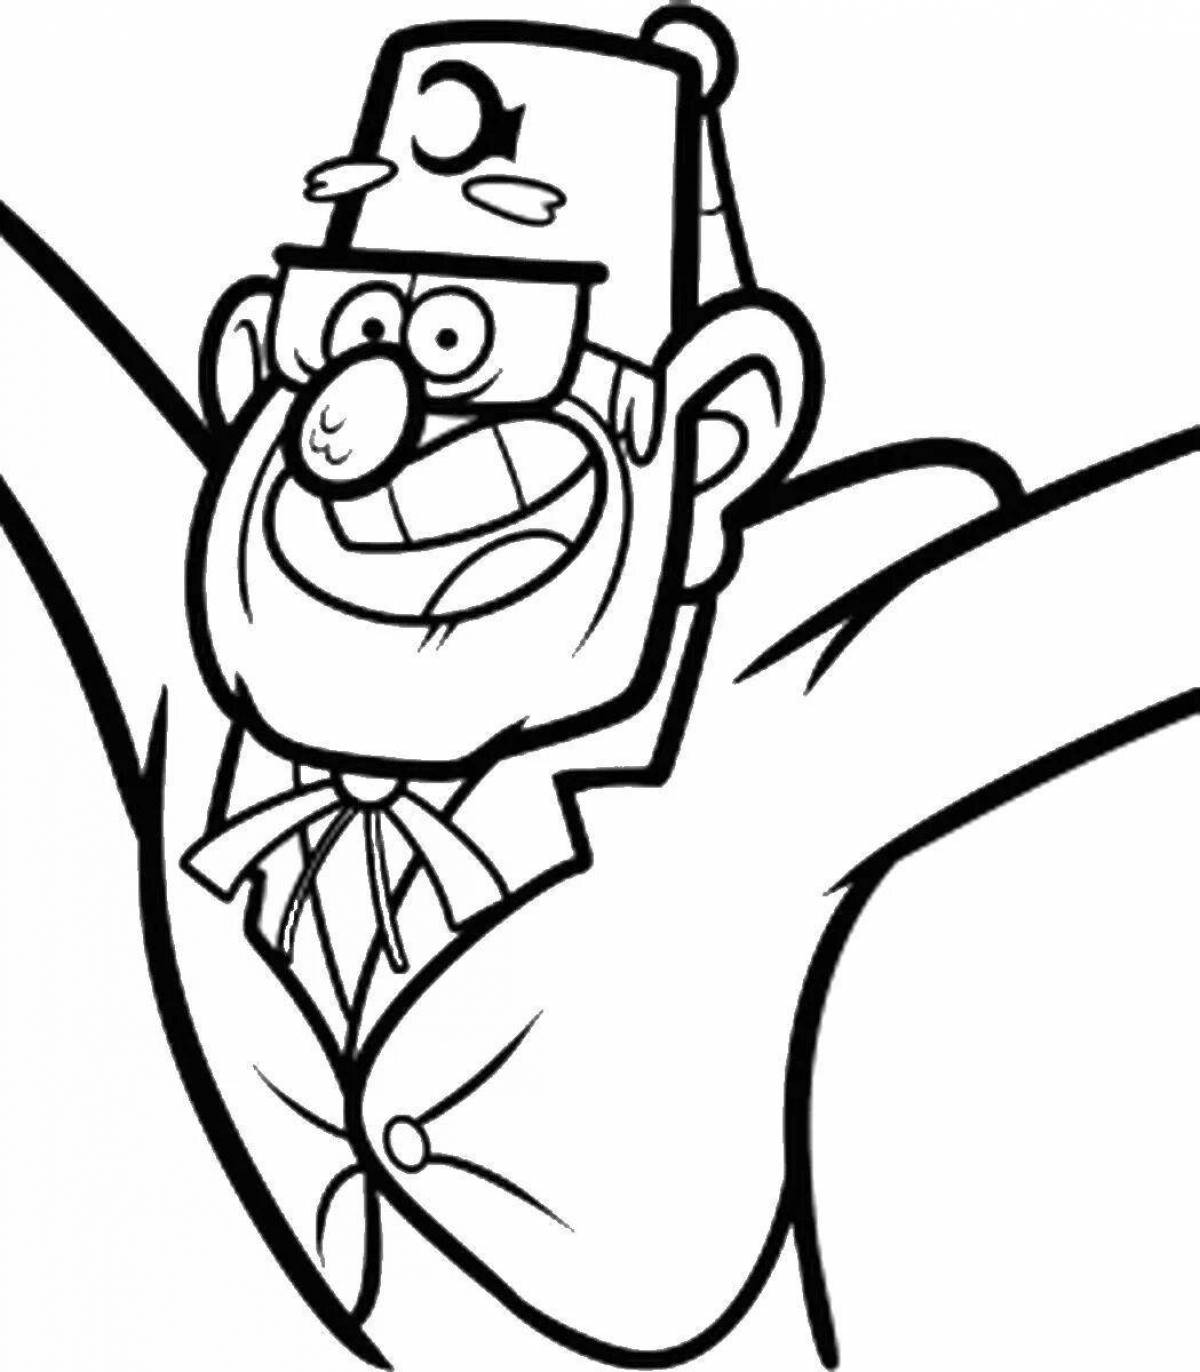 Coloring page bold gideon